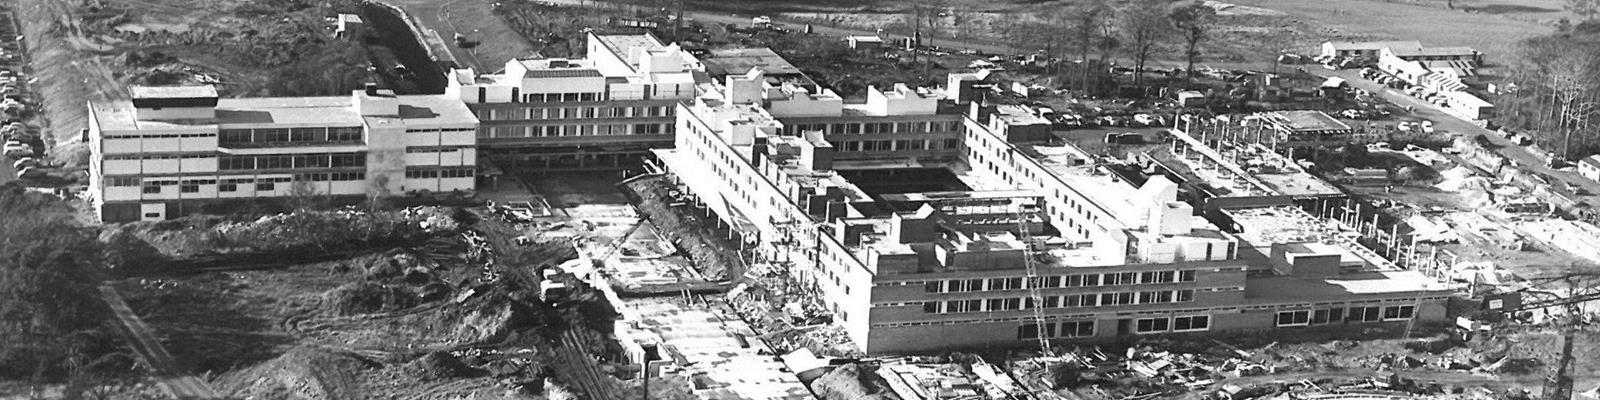 Black and white photograph of Fylde College under construction